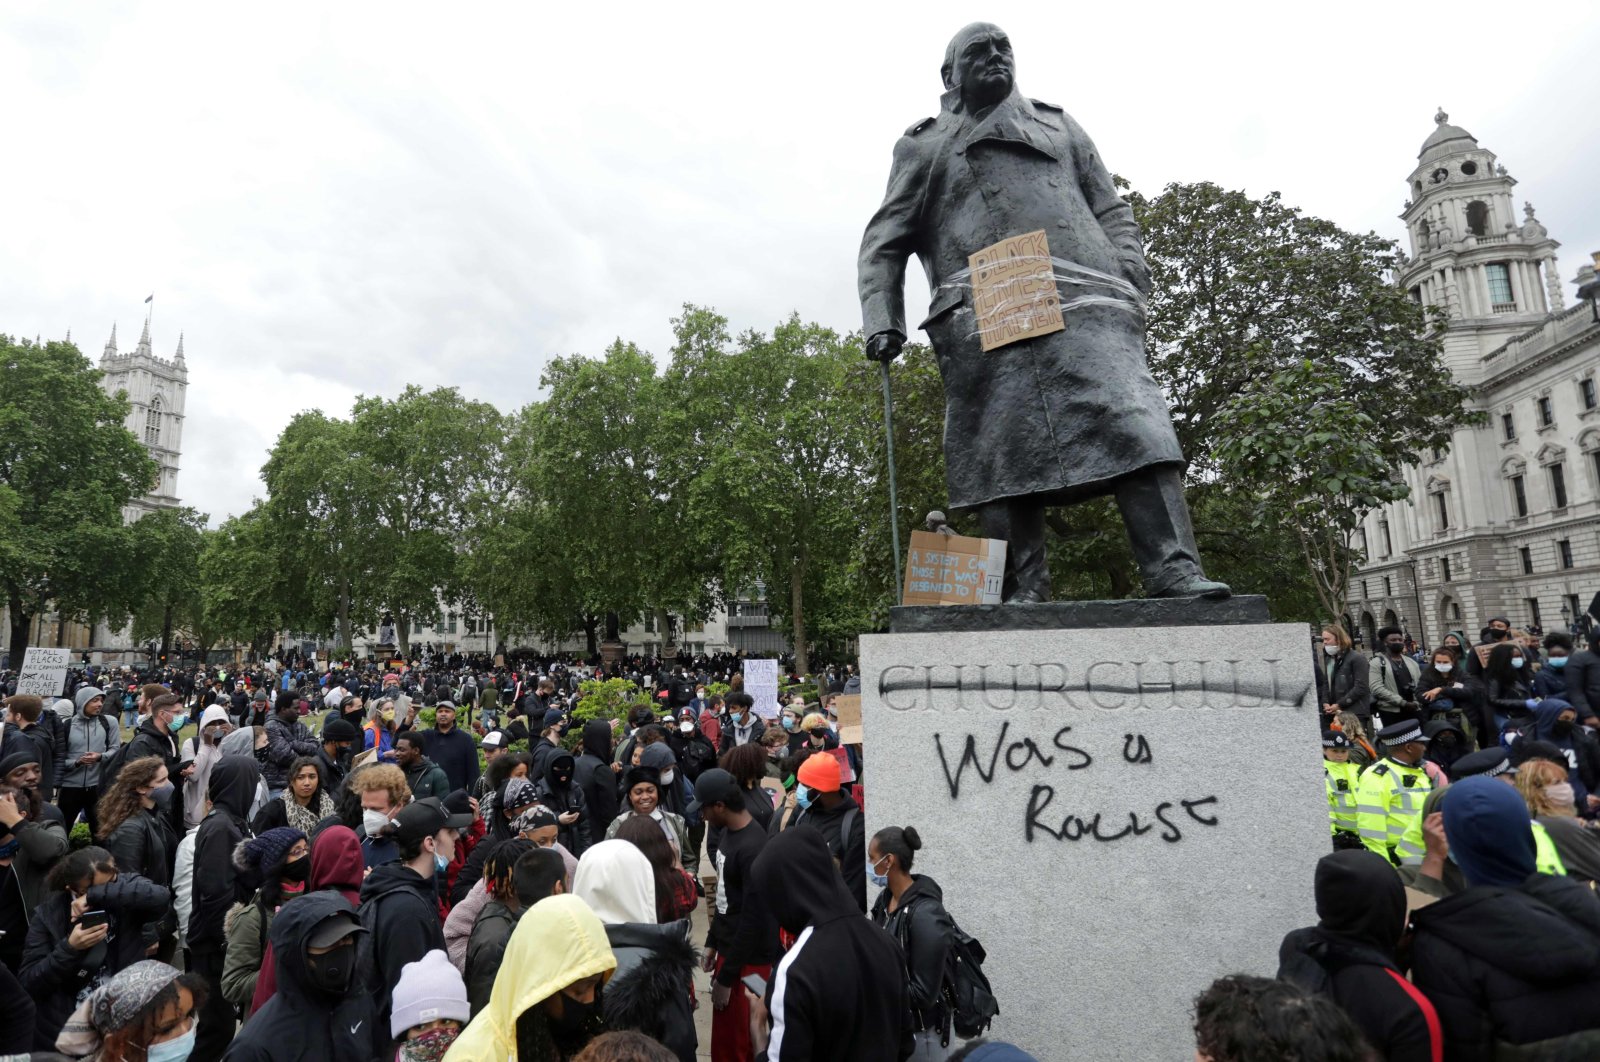 The statue of former British prime minister Winston Churchill is seen defaced, with the words (Churchill) "was a racist" written on it's base in Parliament Square, central London after a demonstration outside the US Embassy, on June 7, 2020. (AFP Photo)